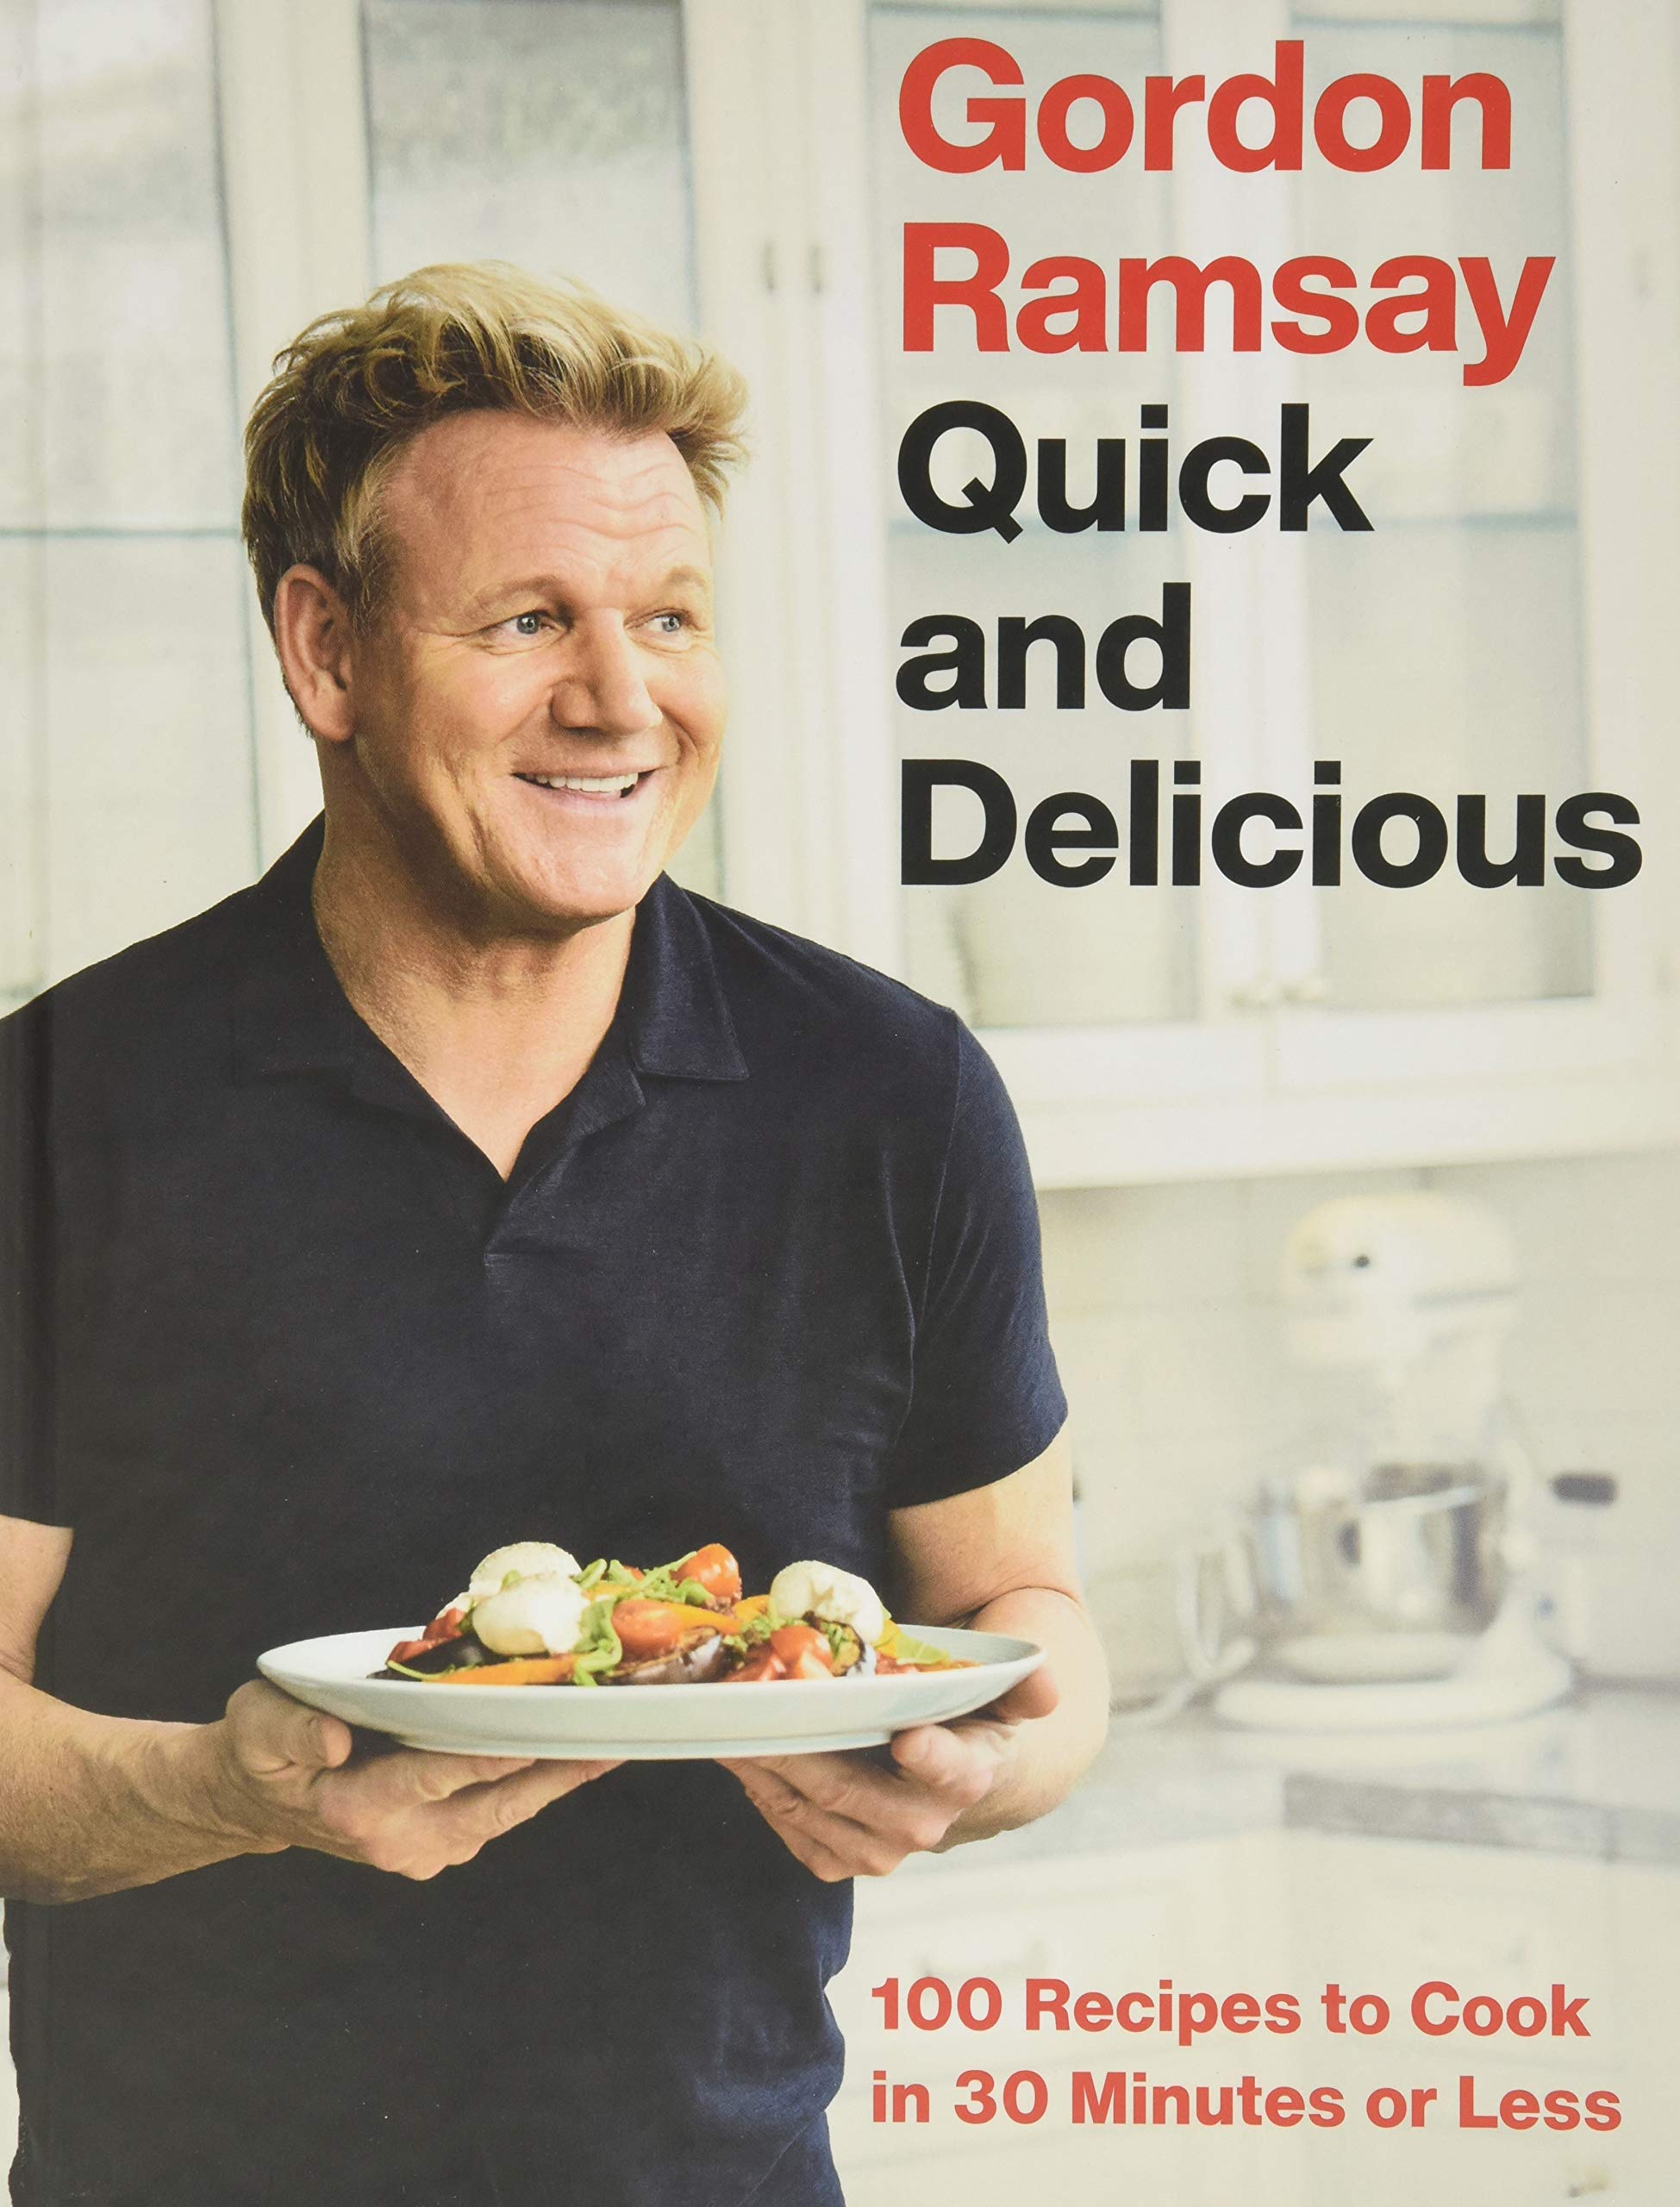 Gordon Ramsay Quick and Delicious: 100 Recipes to Cook in 30 Minutes or Less by Ramsay, Gordon